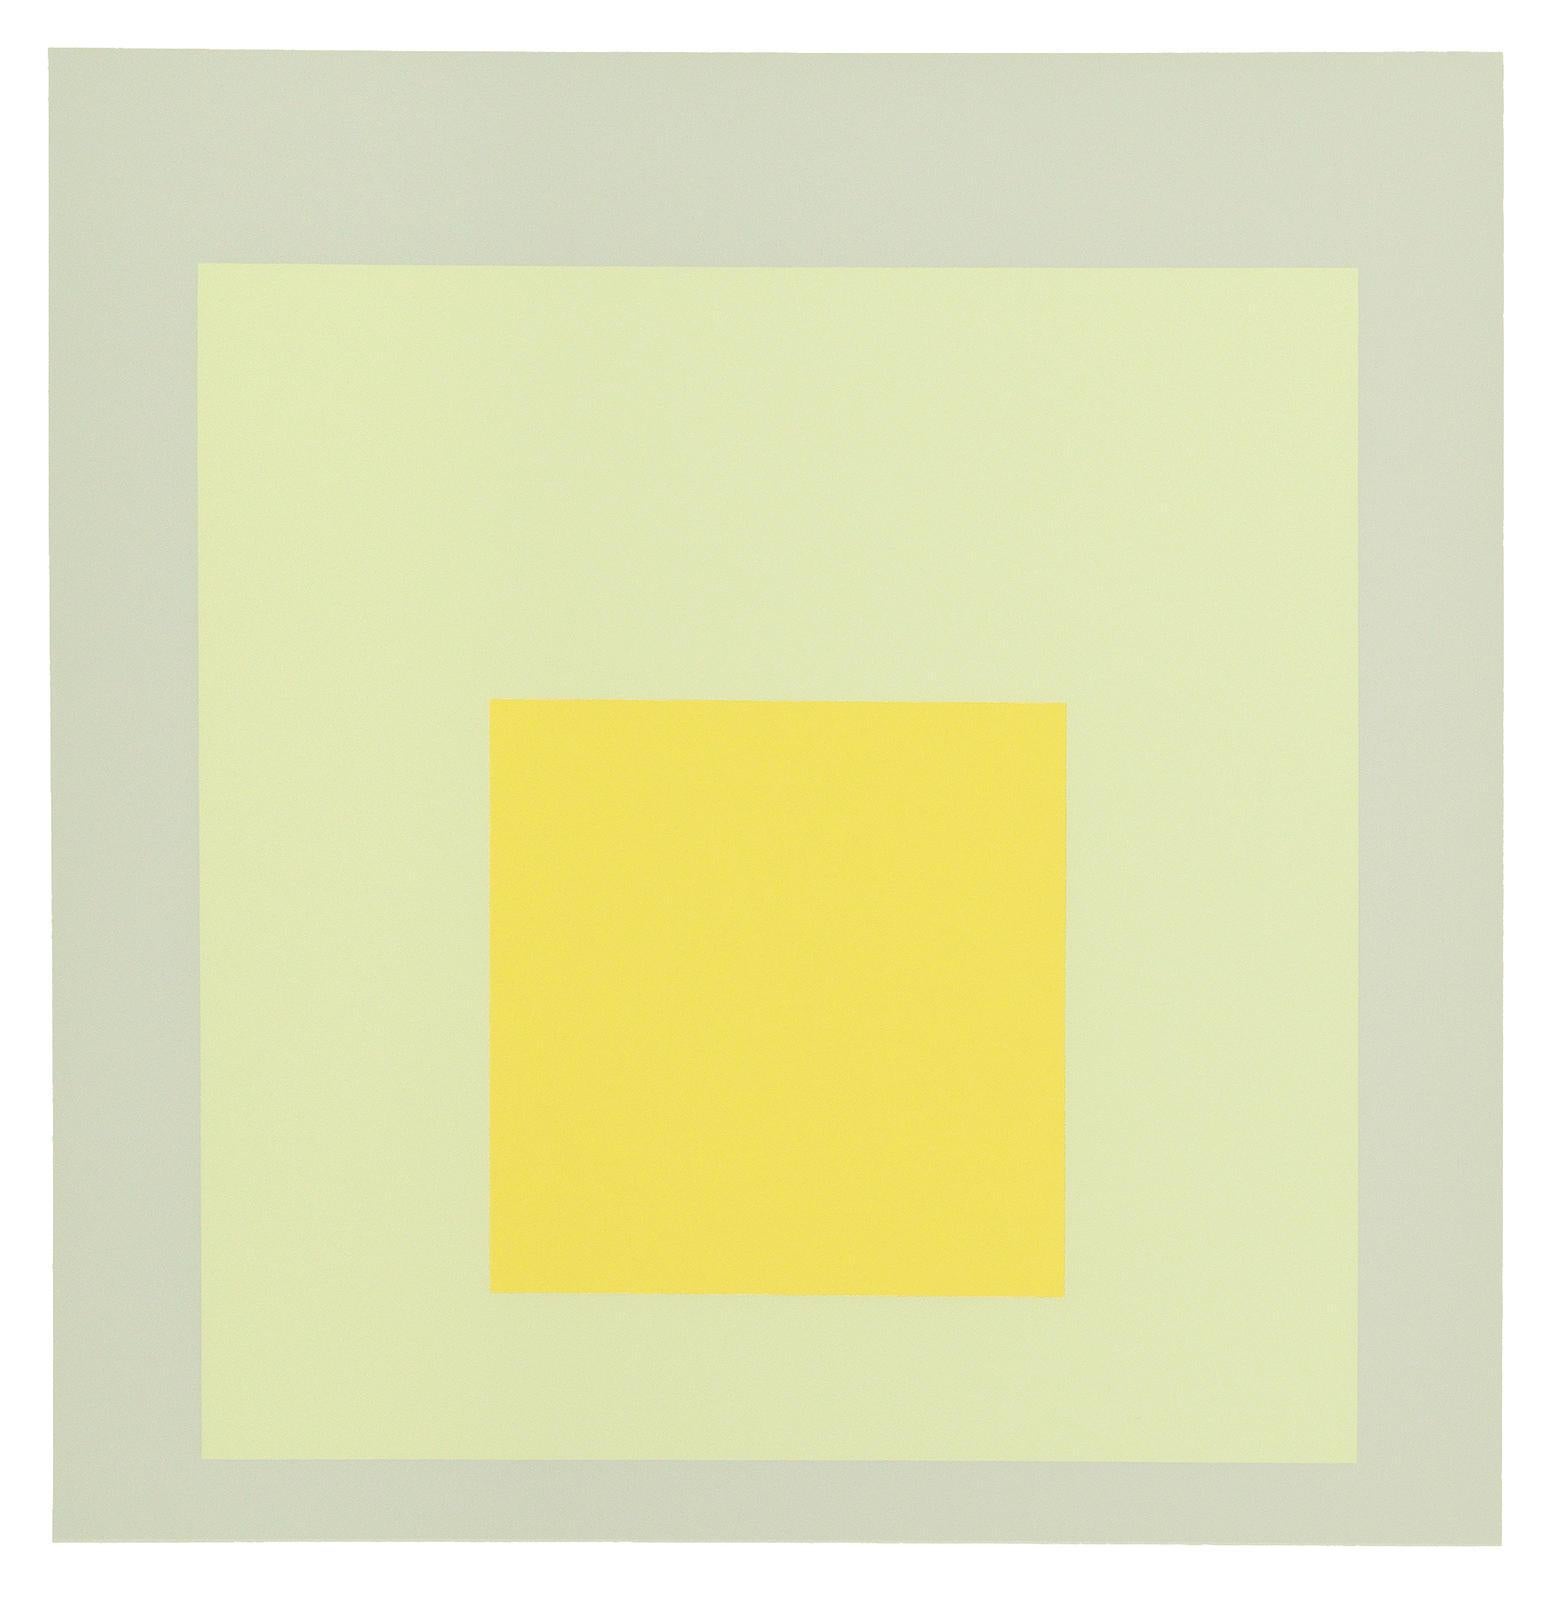 Formulation: Articulation I & II -- Colour Theory, Minimalism by Josef Albers 5